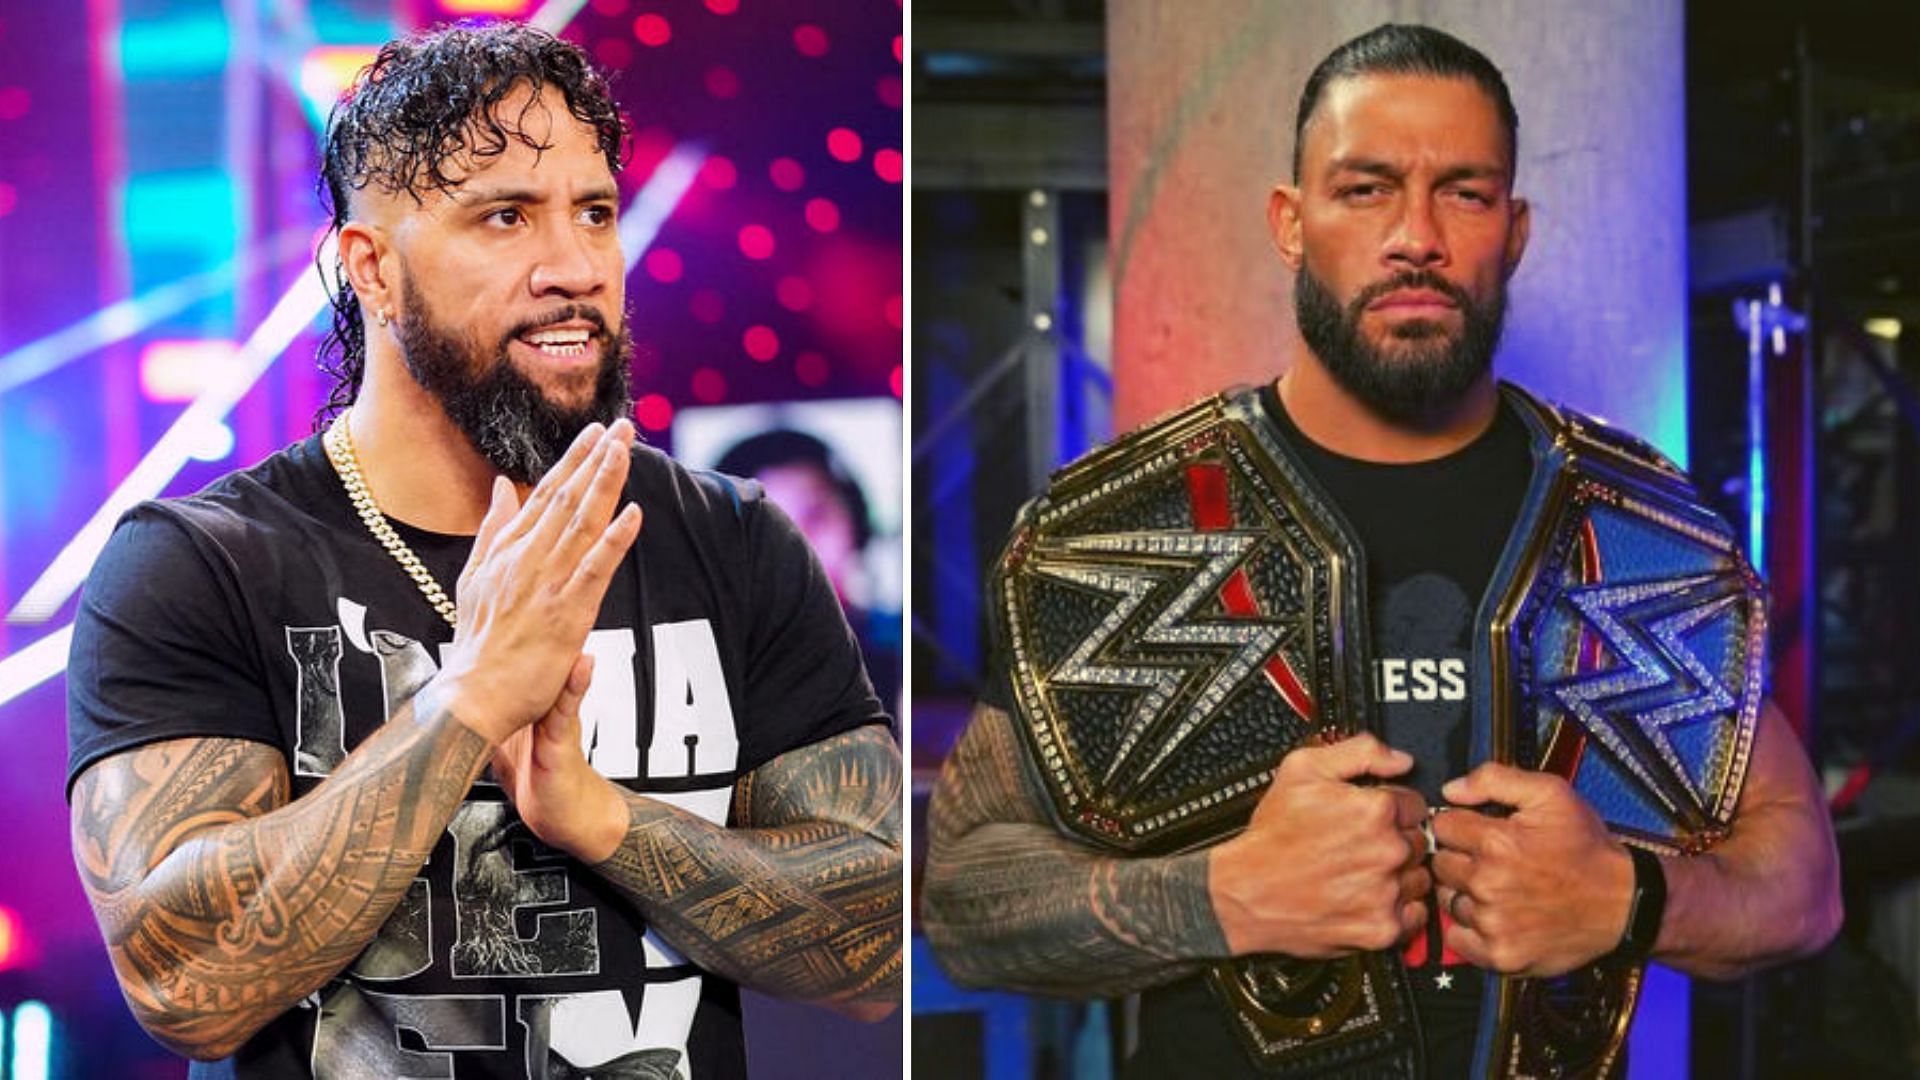 Jey Uso was forced into The Bloodline by Roman Reigns